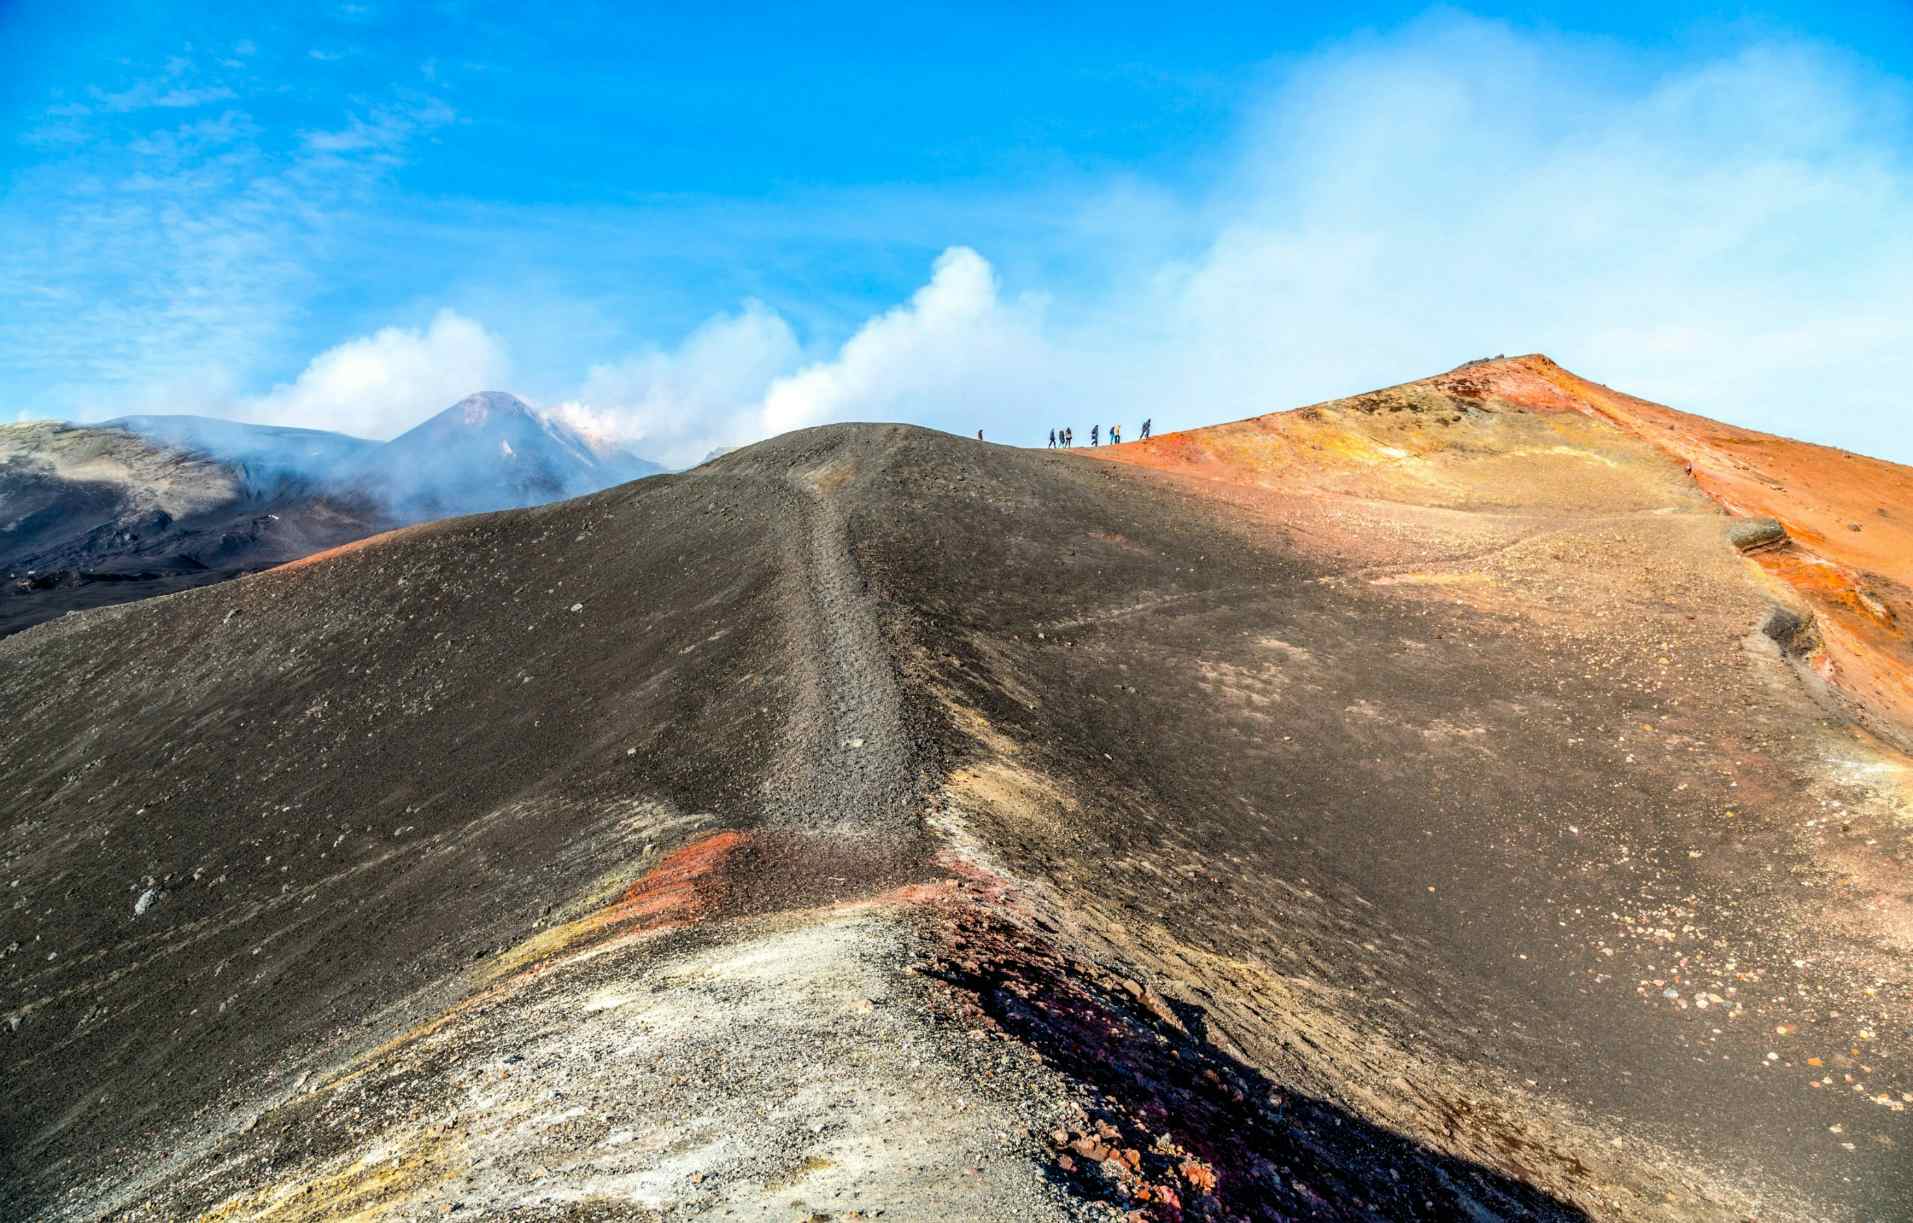 Hikers on Crater of Mount Etna, Sicily. Photo: Shutterstock 179367866